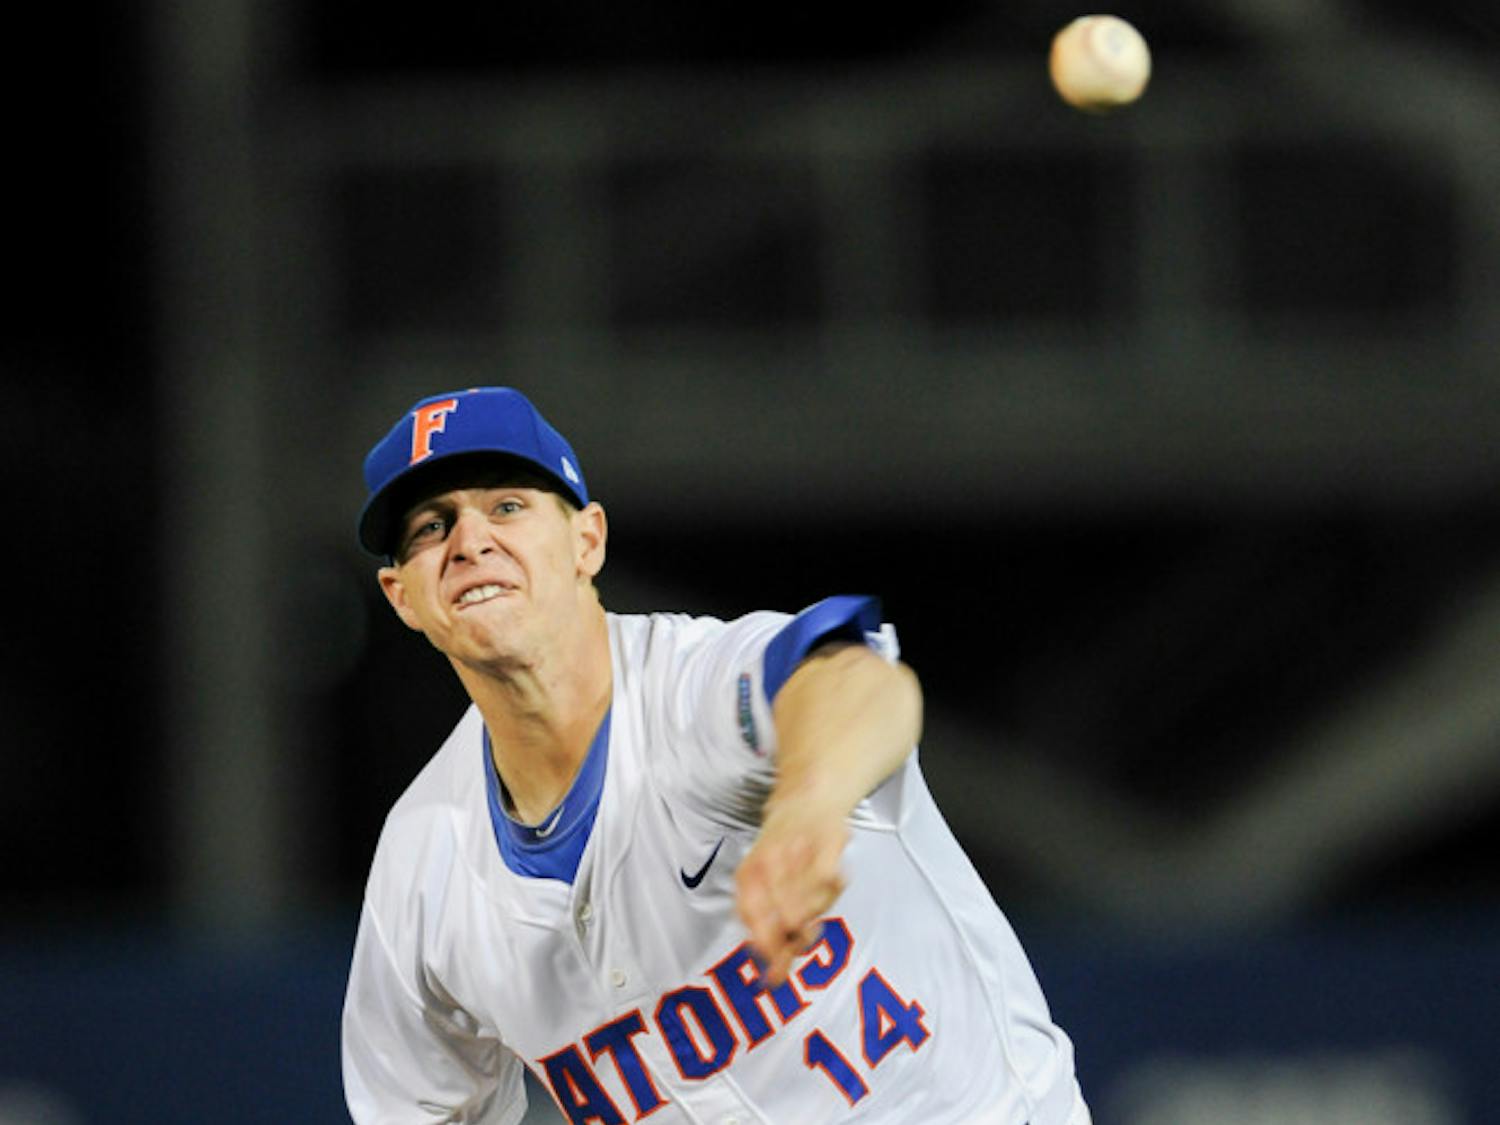 Bobby Poyner pitches during Florida’s 4-0 win against Maryland on Feb. 14 at McKethan Stadium.